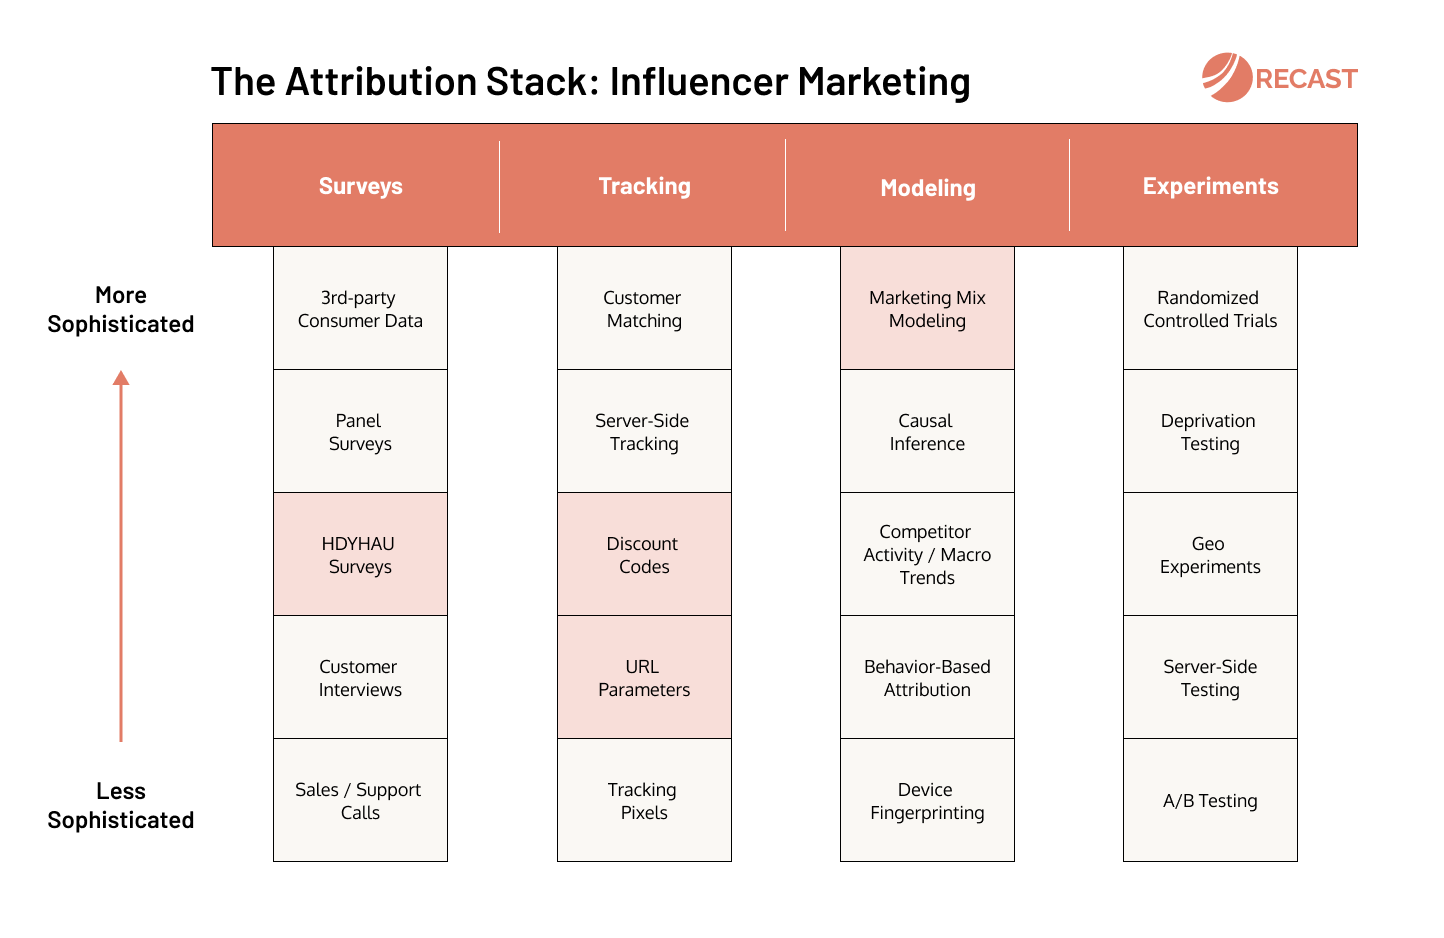 How to Measure Influencer Marketing: 8 Proven Tracking Methods